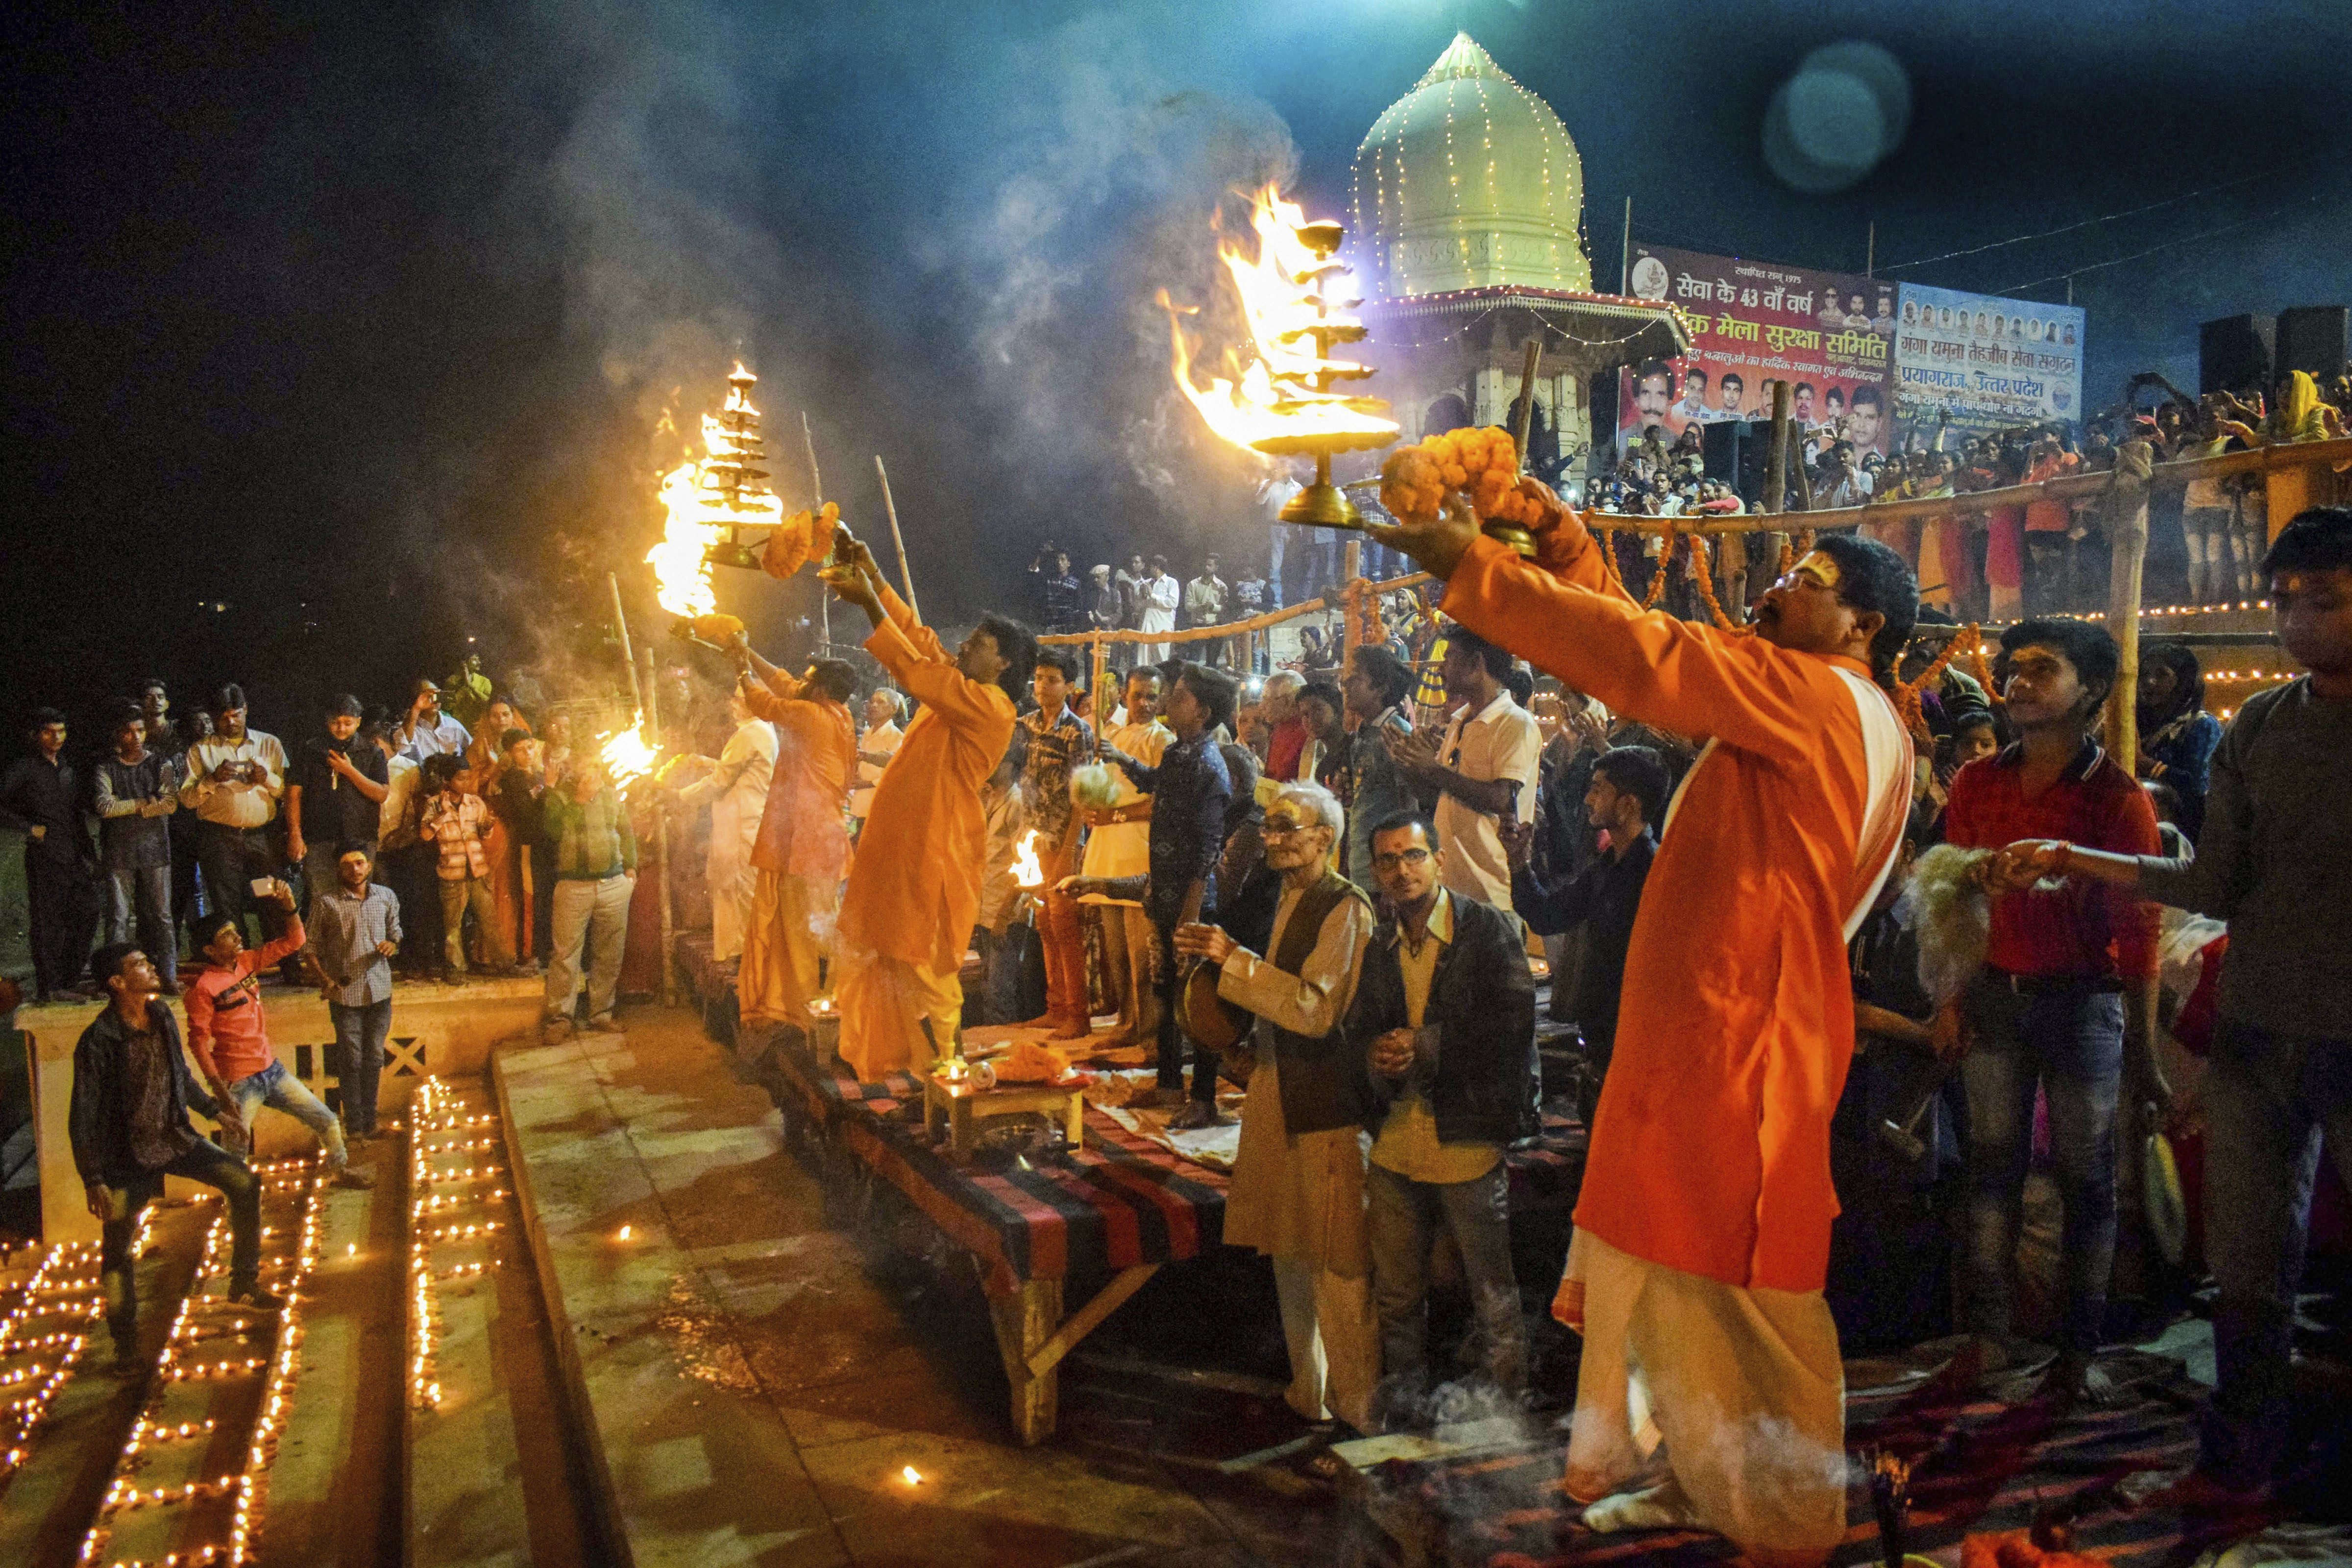 Priests perform 'Maha Aarti' on the occasion of 'Devotthan Ekadashi' festival, in Allahabad - PTI